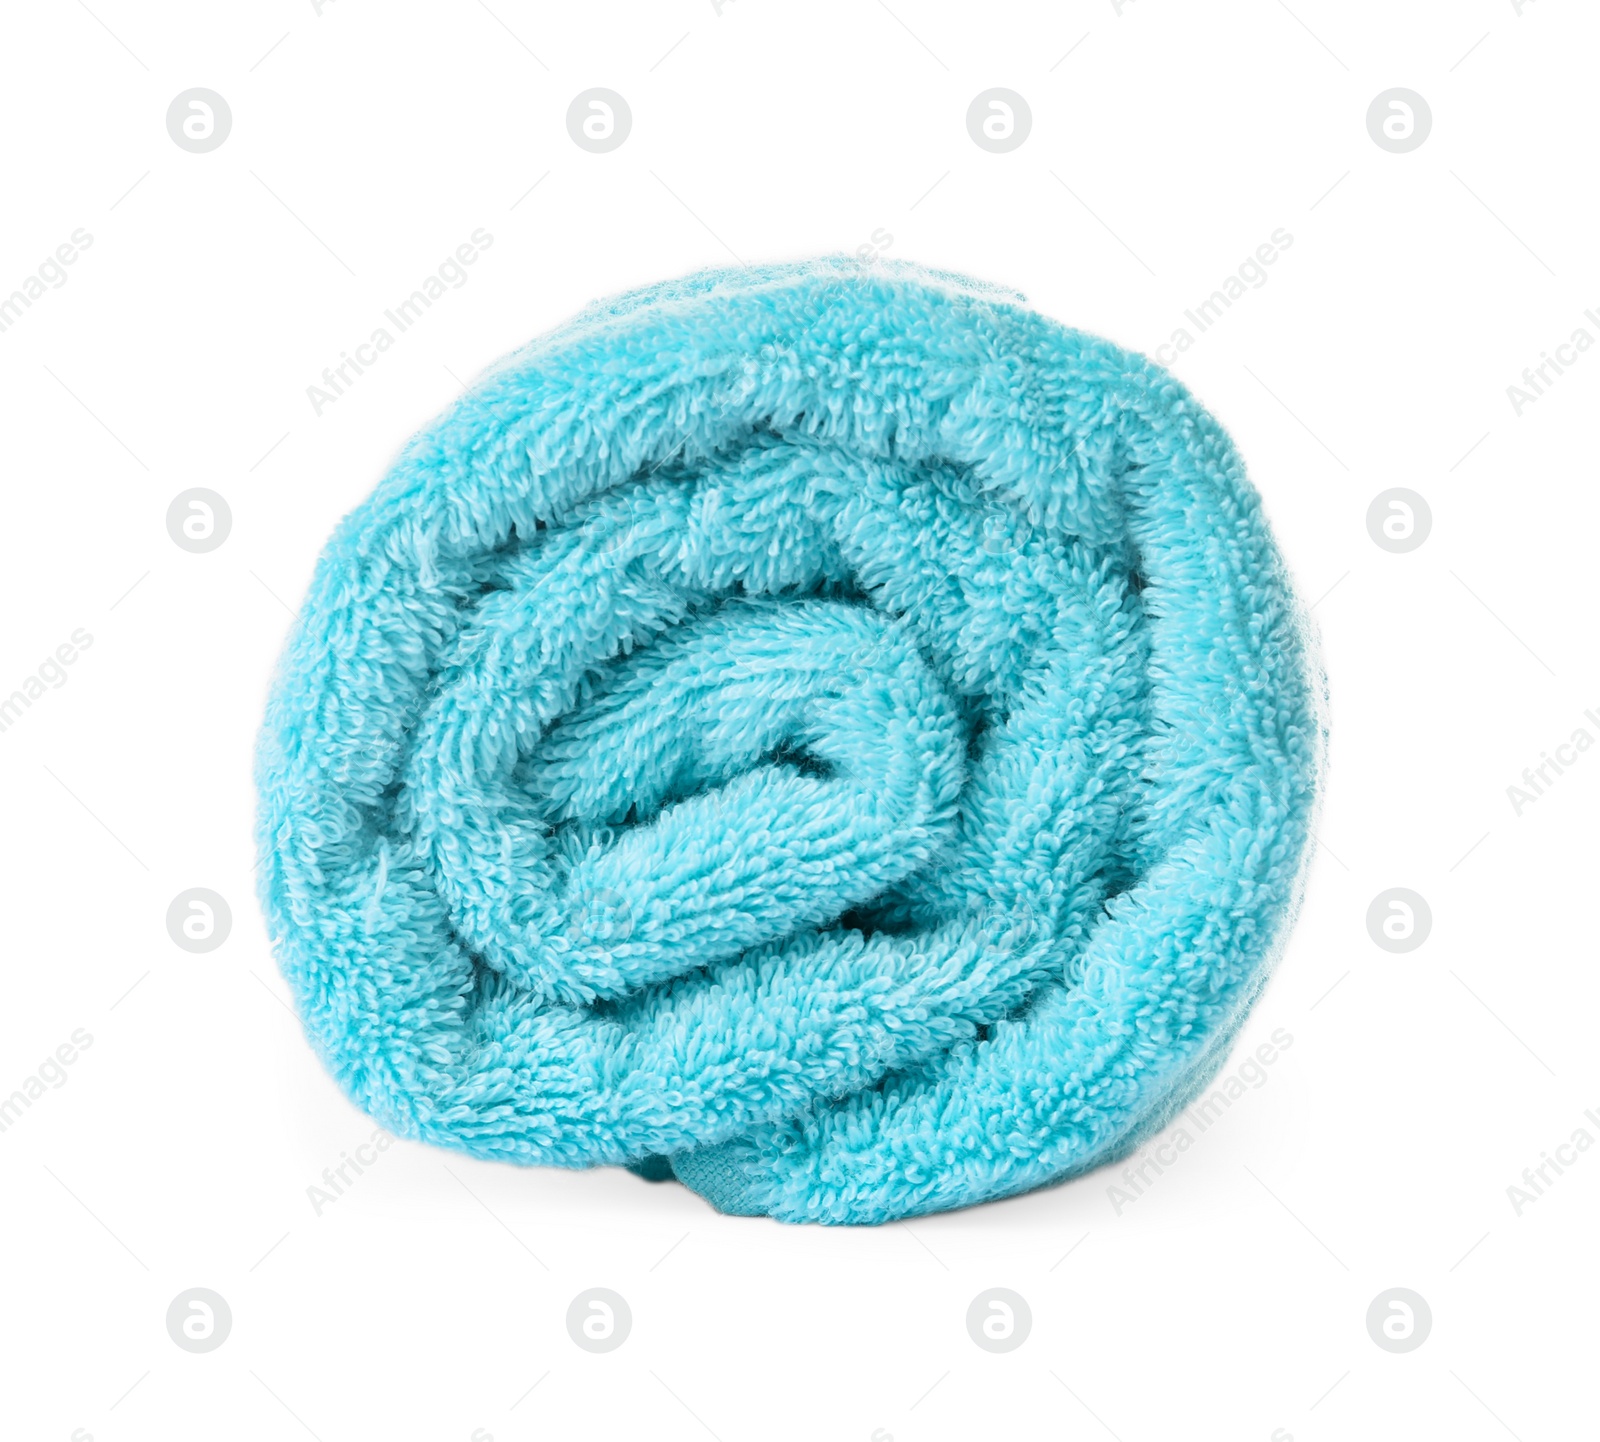 Photo of Rolled clean turquoise towel on white background